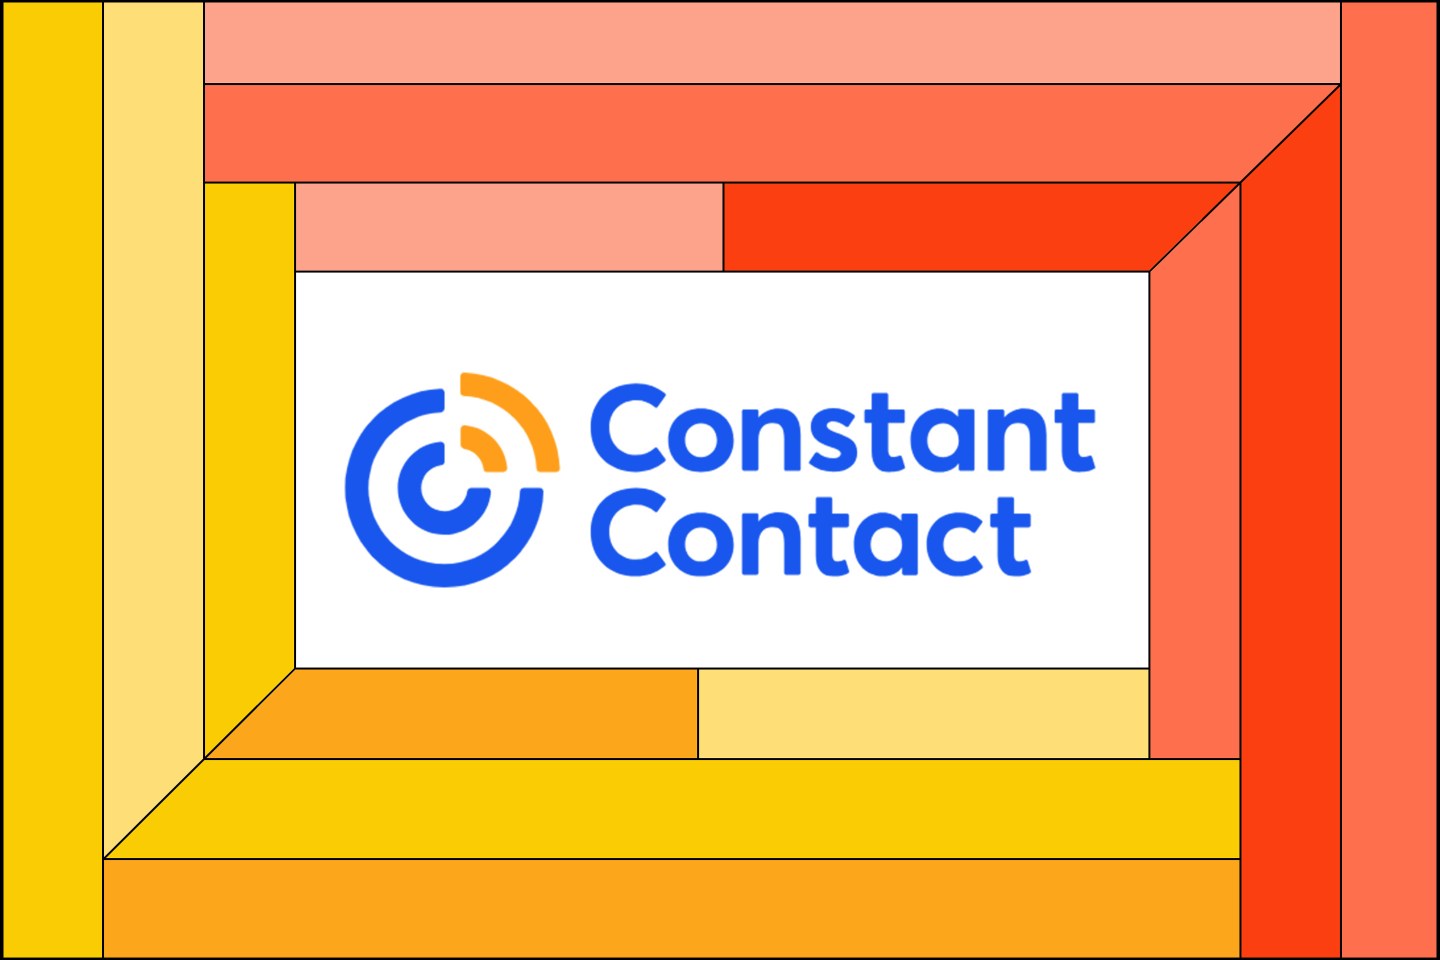 Illustration of ConstantContact logo inside a yellow and red frame.